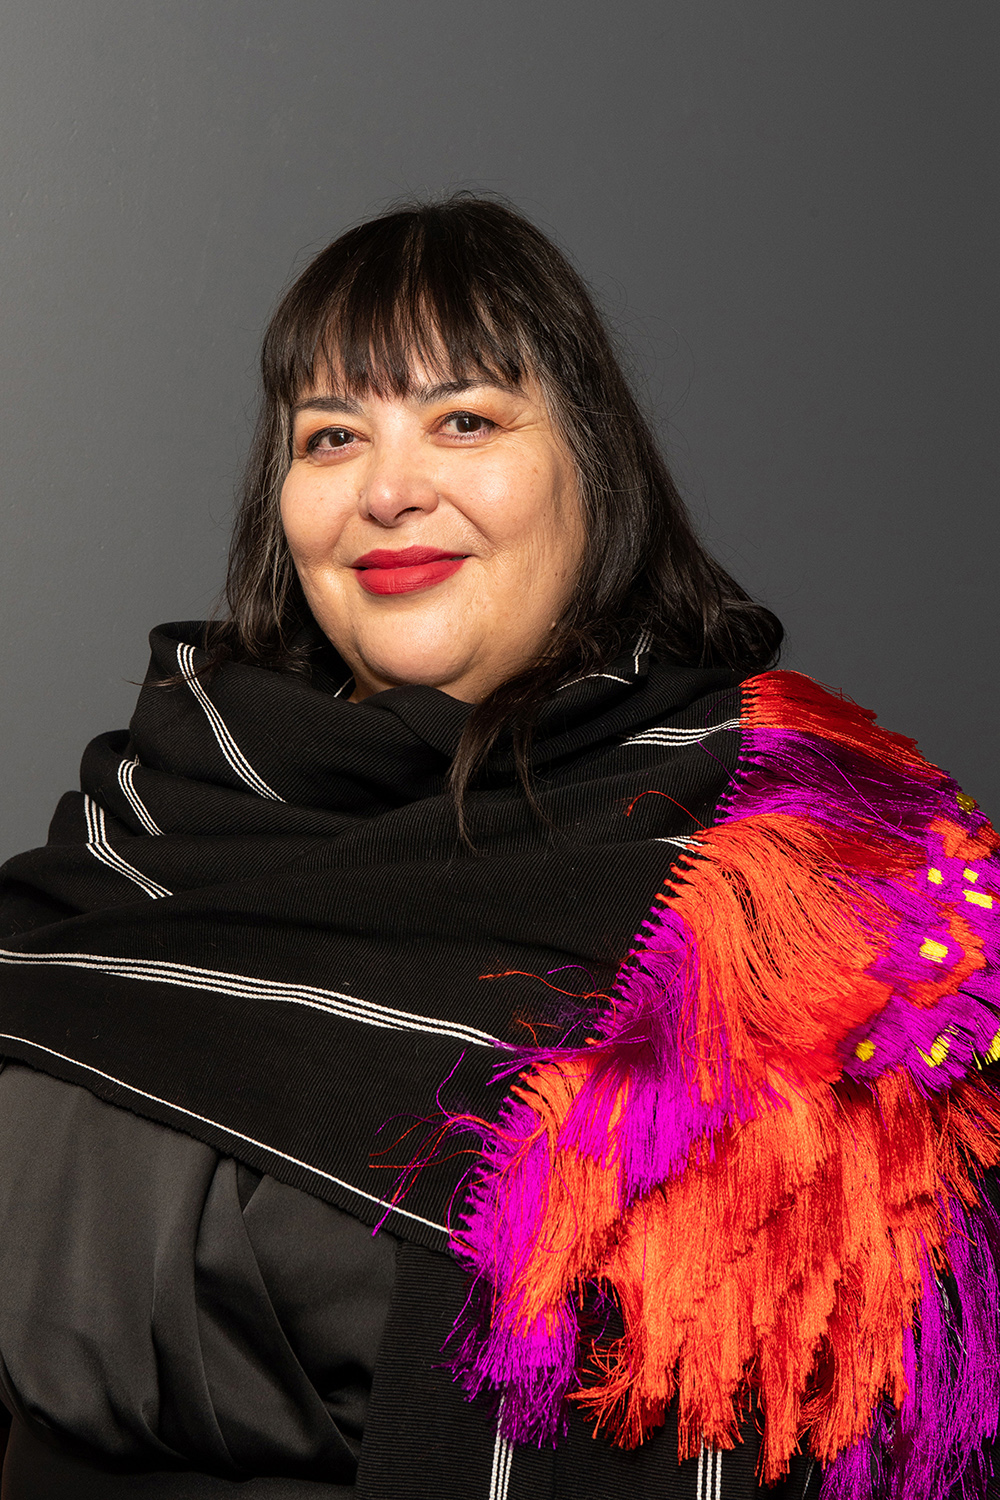 Color photograph of a light skinned woman with dark hair and bright red lipstick smiling at the camera; she wears a complex, multilayered garment in black, fucsia, and orange